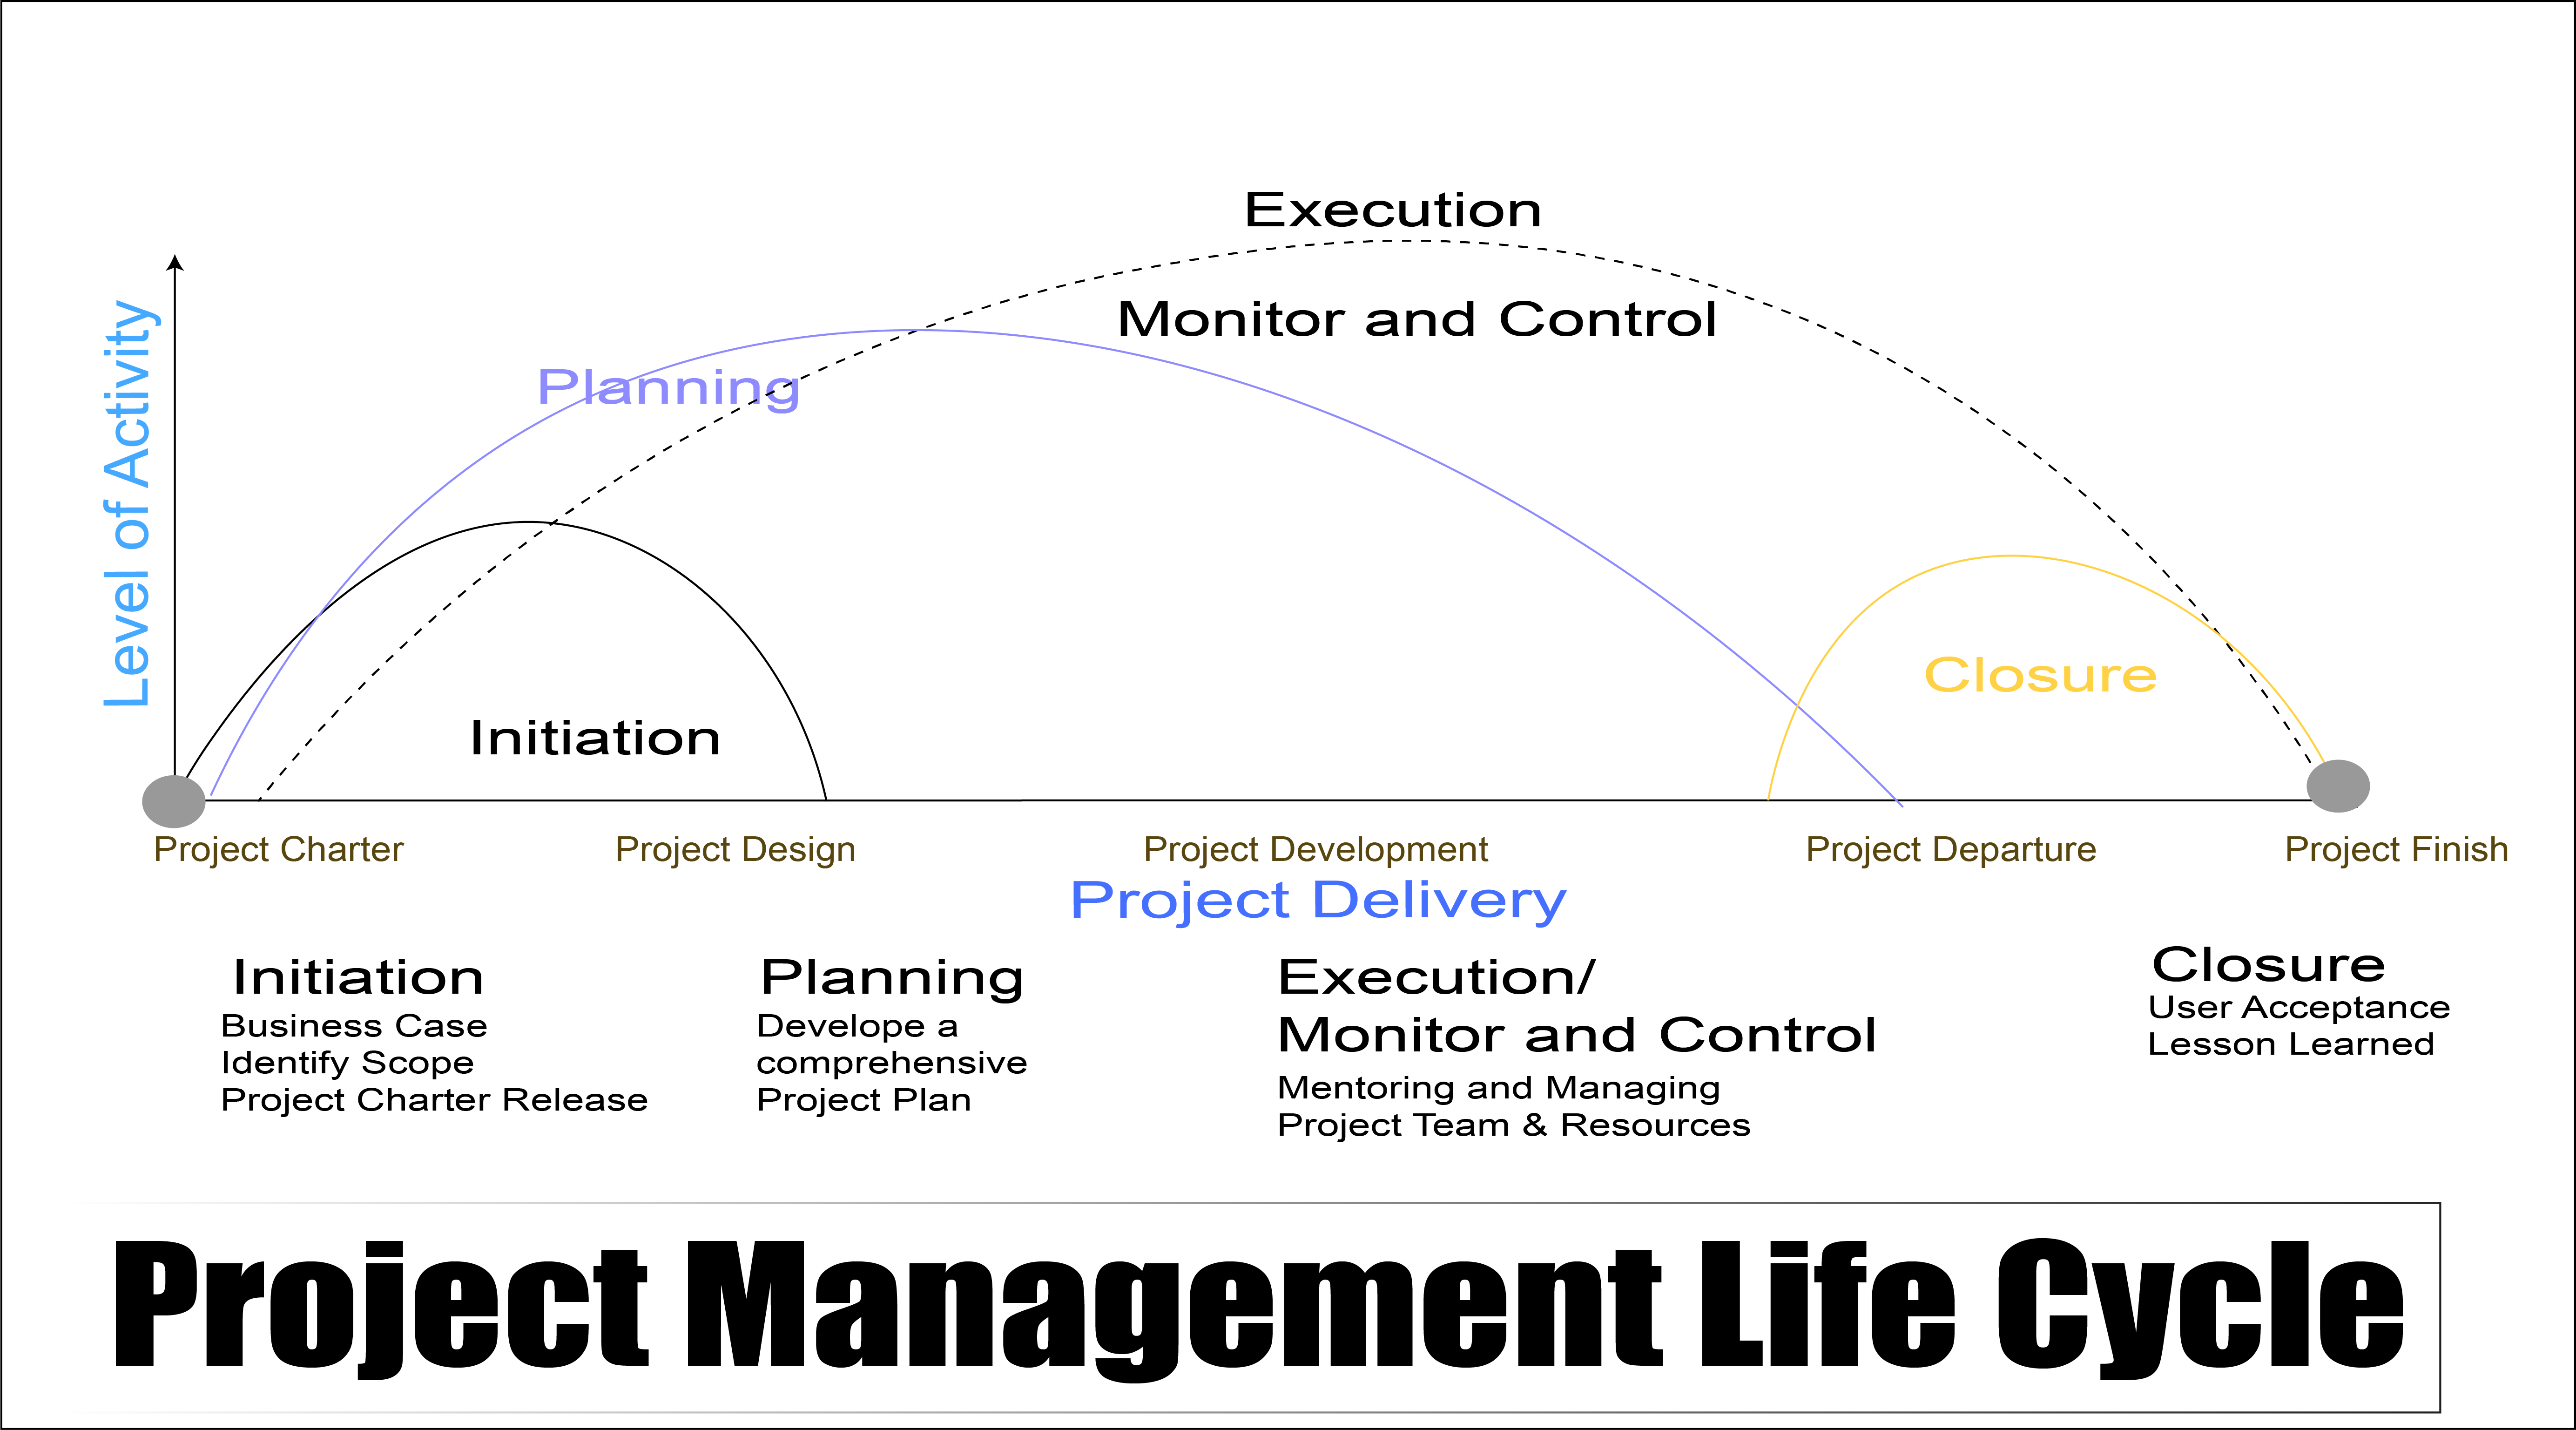 Project Management life cycle